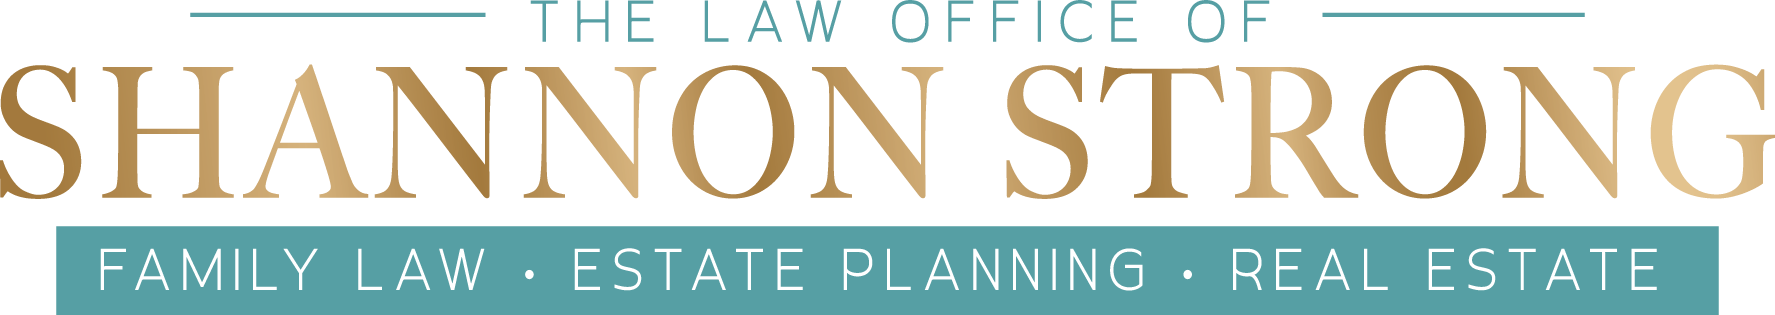 The logo for the law office of shannon strong family law estate planning real estate